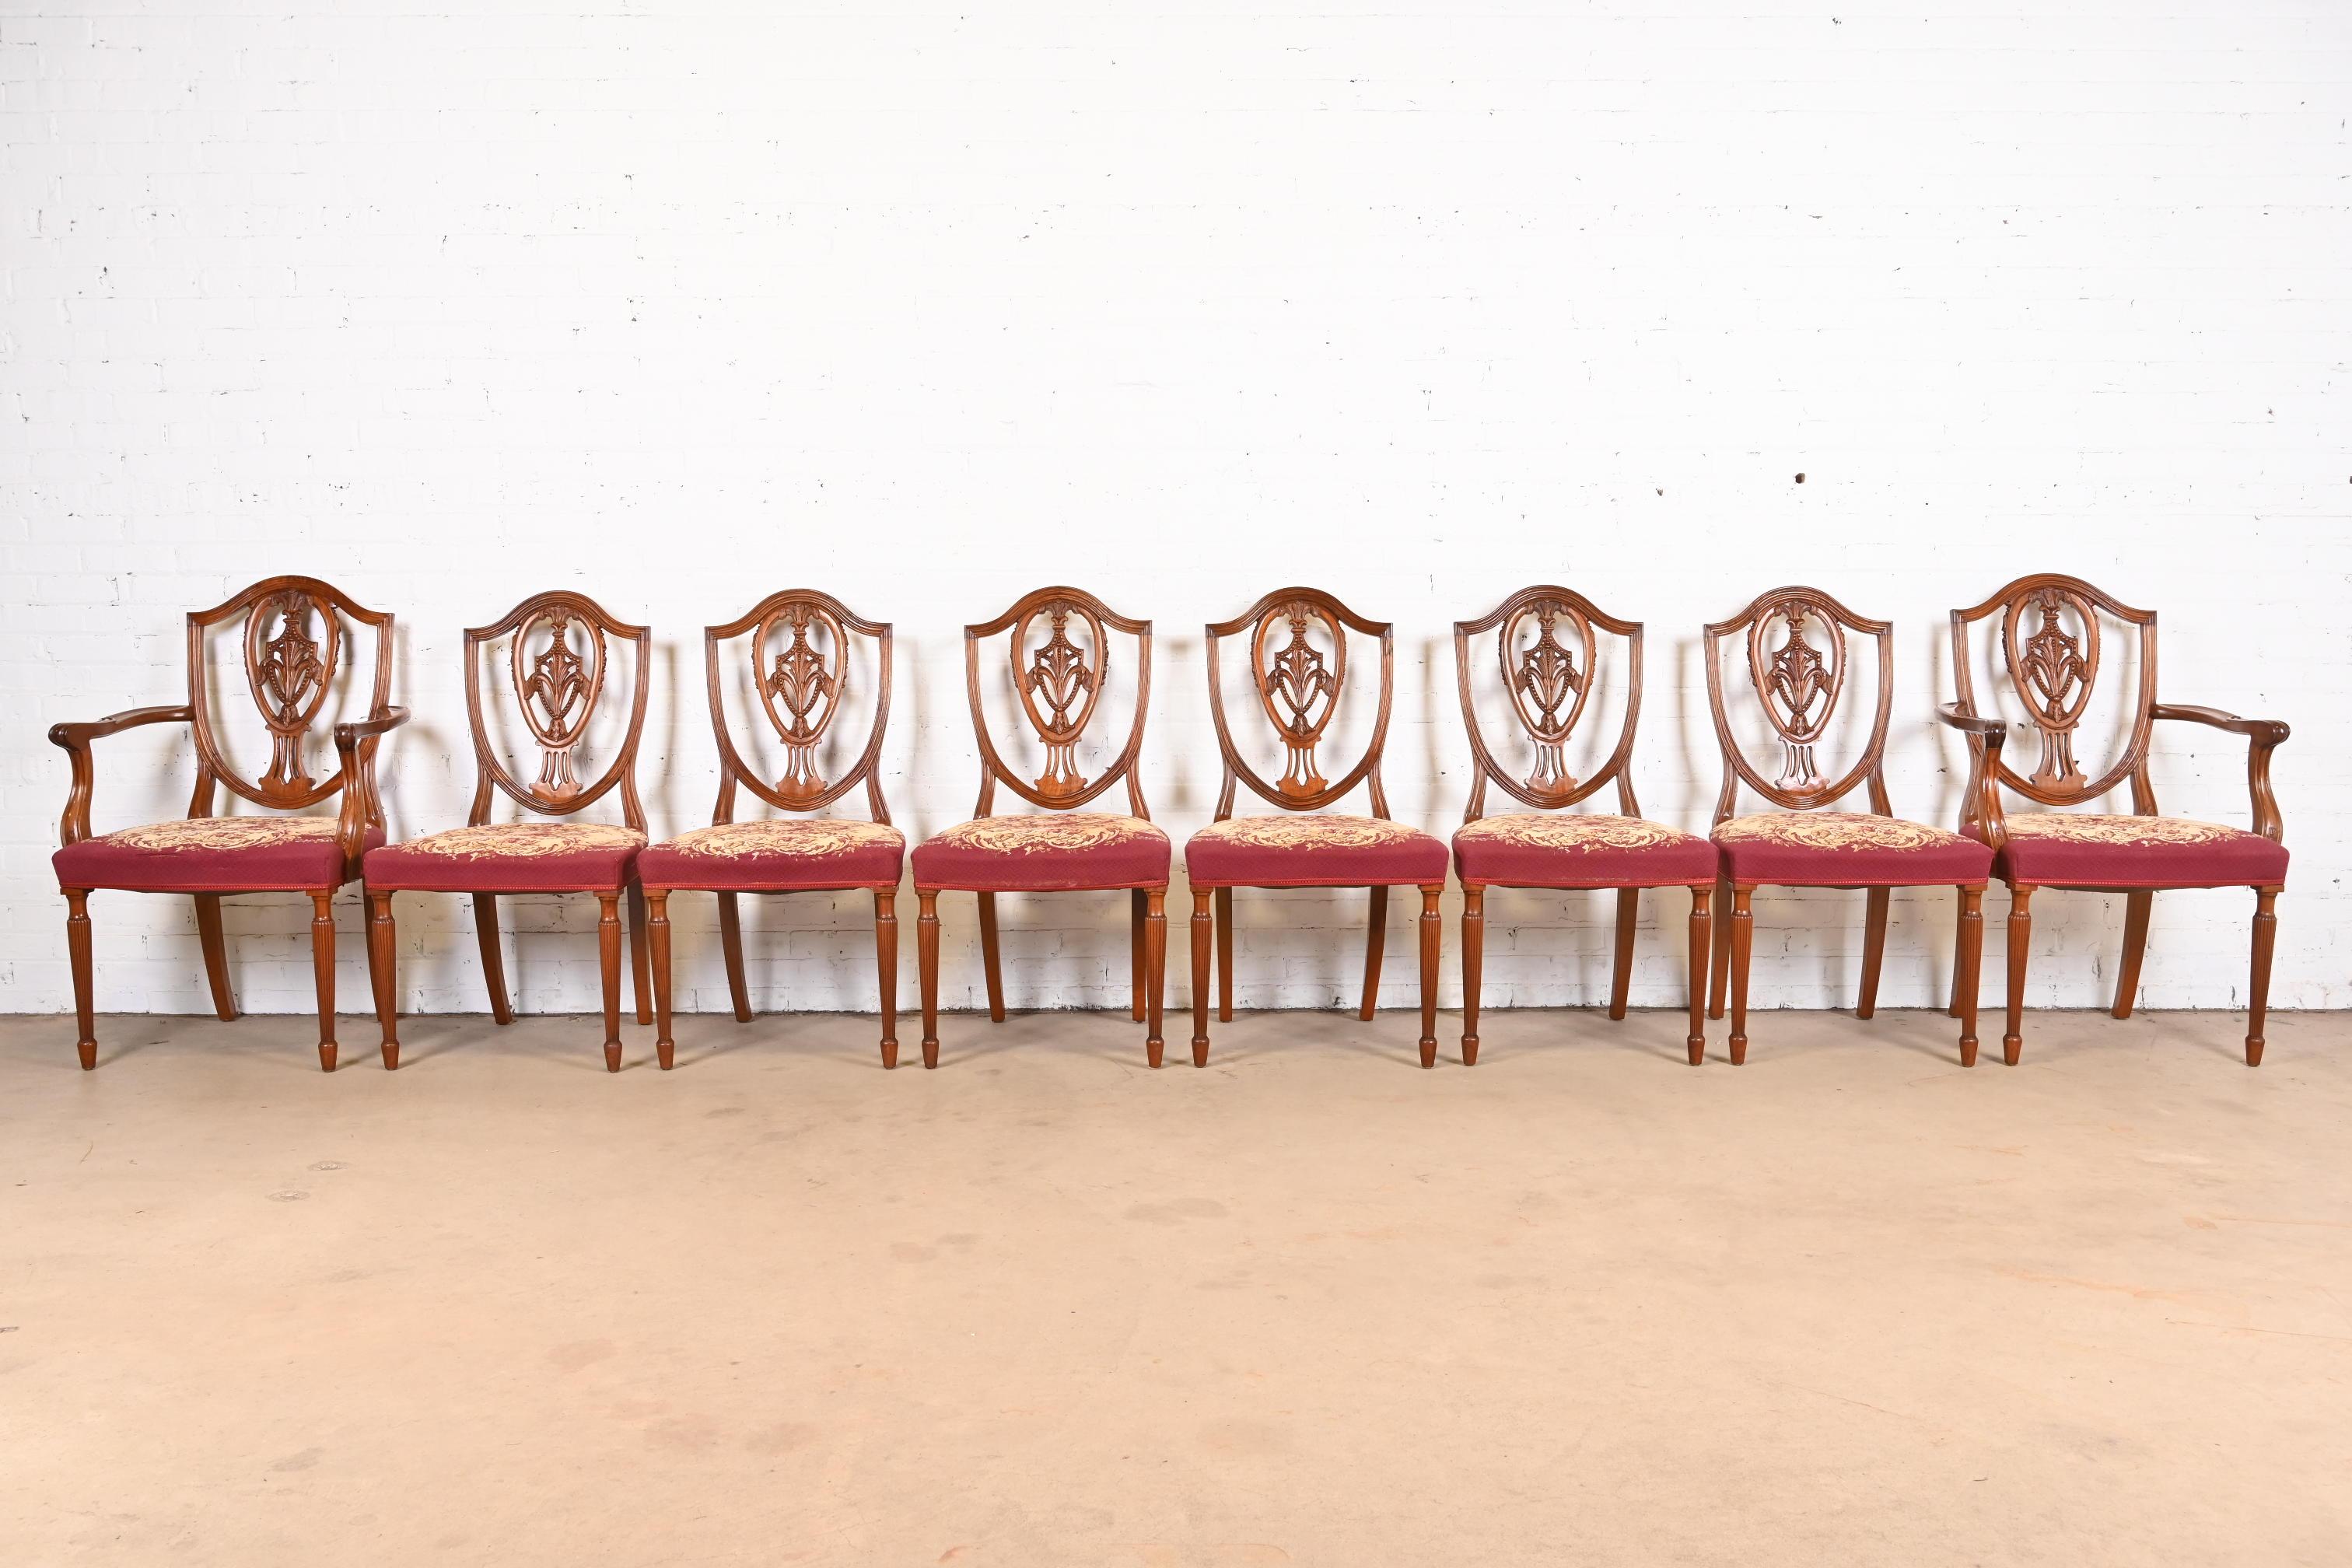 A gorgeous set of eight Louis XVI or Georgian style shield back dining chairs

In the manner of Baker Furniture

USA, Circa 1960s

Carved mahogany, with needlepoint floral upholstered seats.

Measures:
Side chairs - 21.5